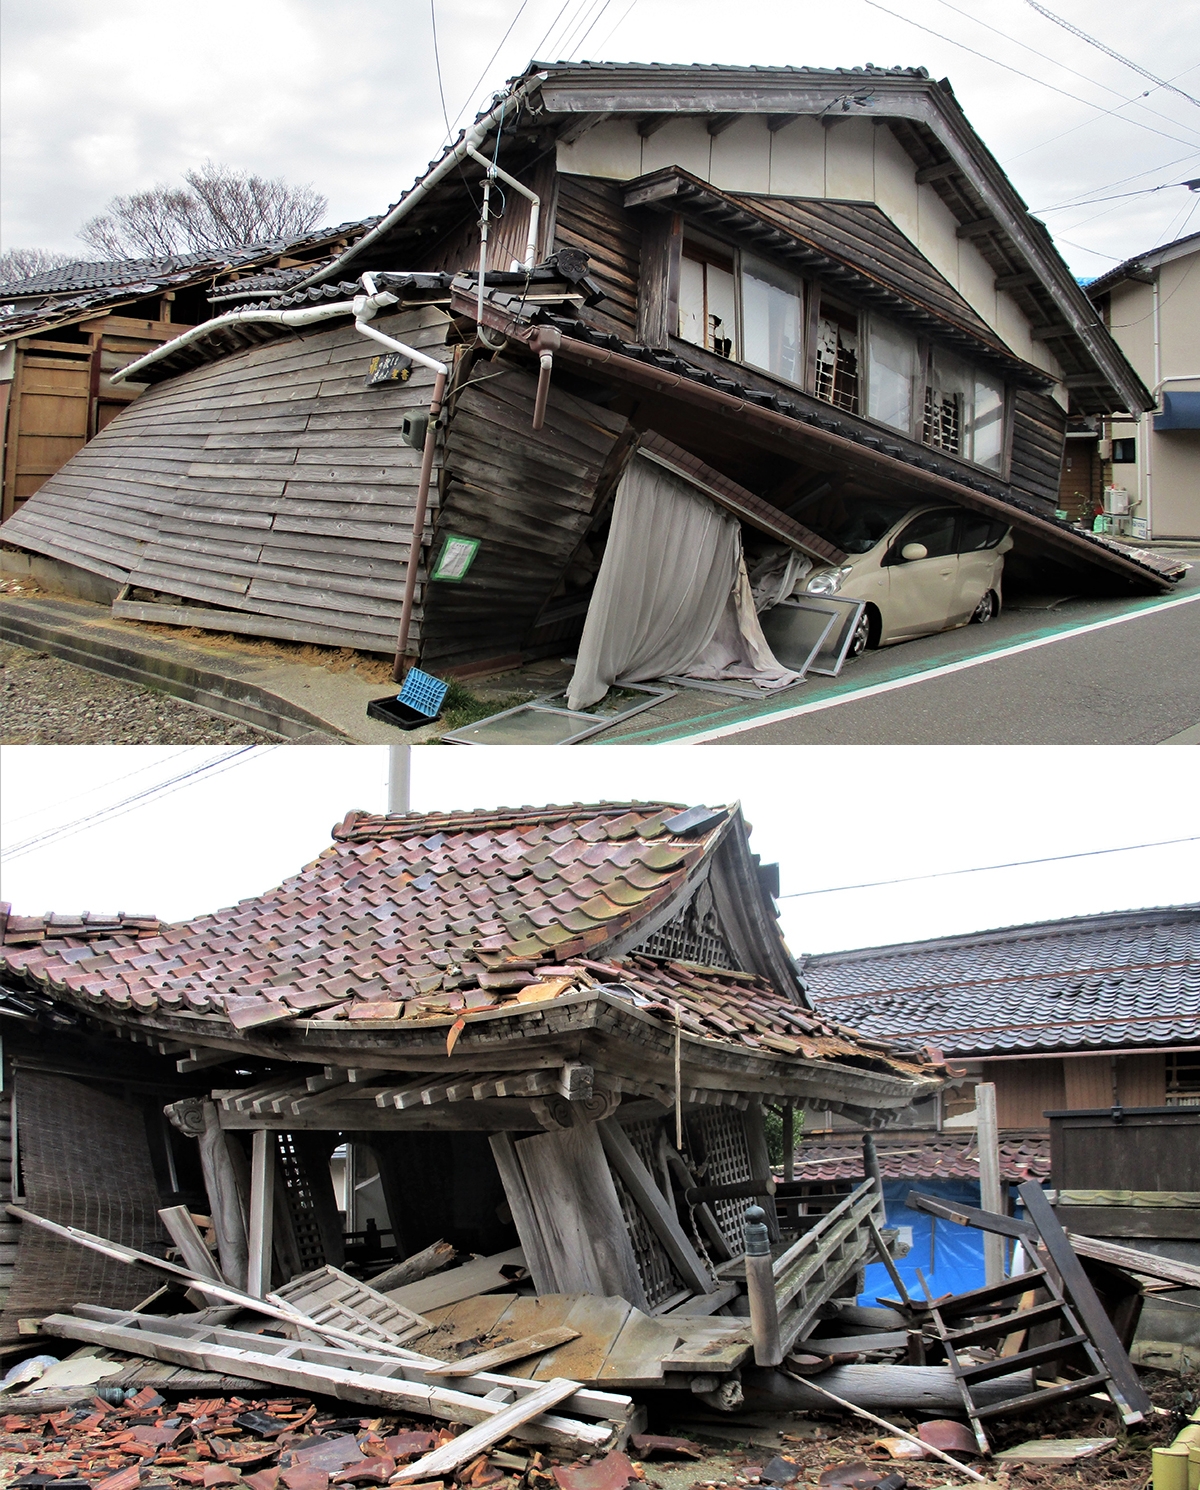 Photos of collapsed houses and temples are shown above and below